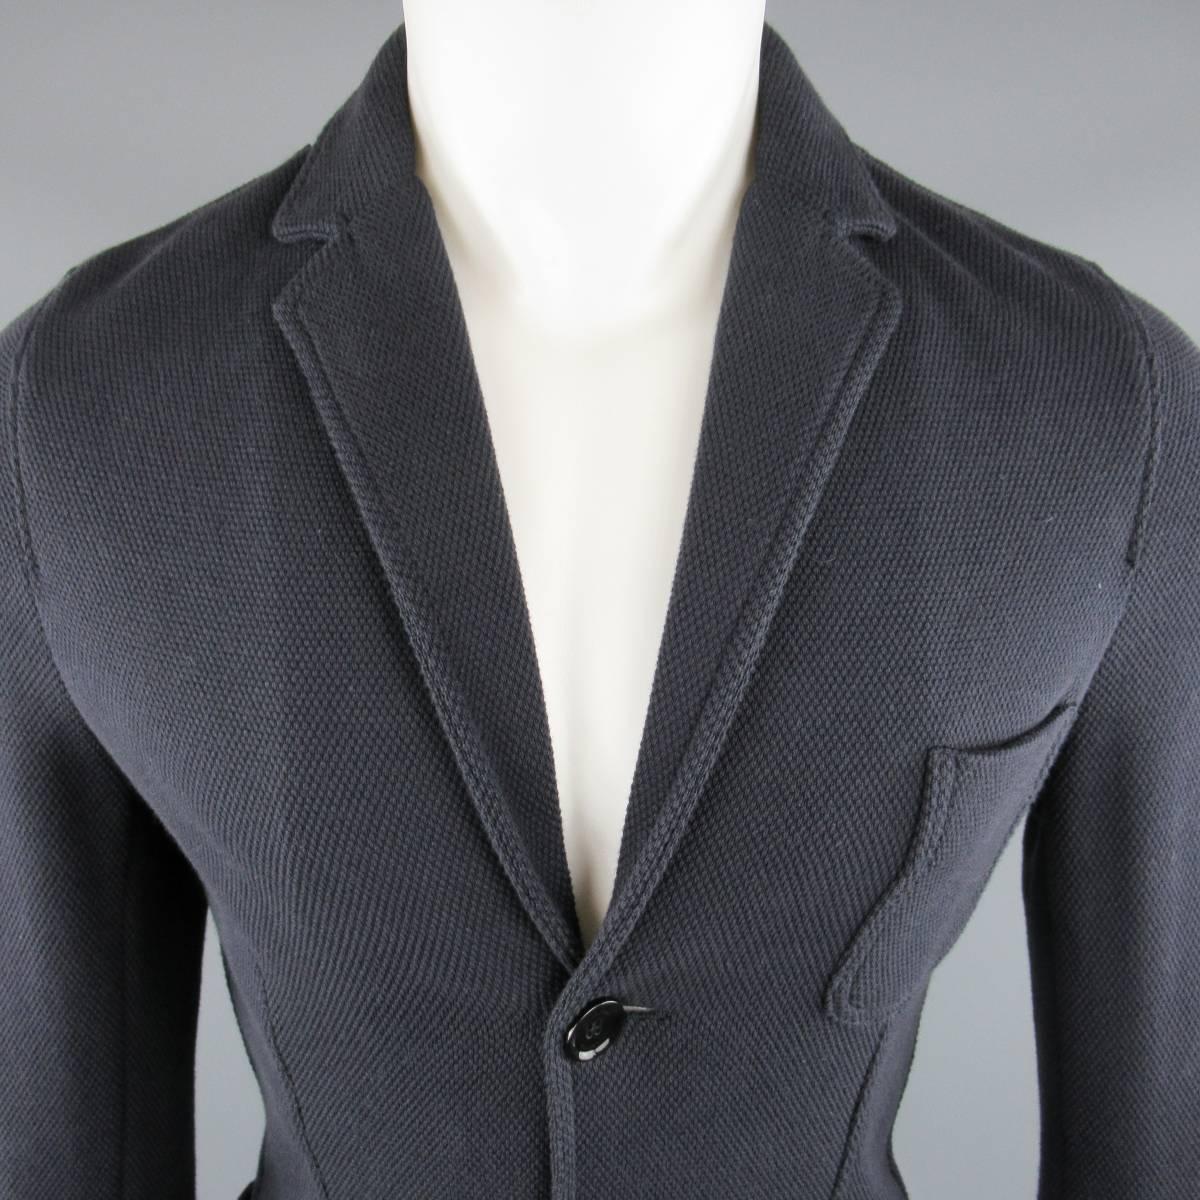 VALENTINO Sport Coat consists of cotton blend material in a navy color tone. Designed in a notch lapel, 2-button front with bottom patch pockets and top pocket. Unconstructed lining. Made in Italy.
 
Good Pre-Owned Condition 
Marked Size: S
